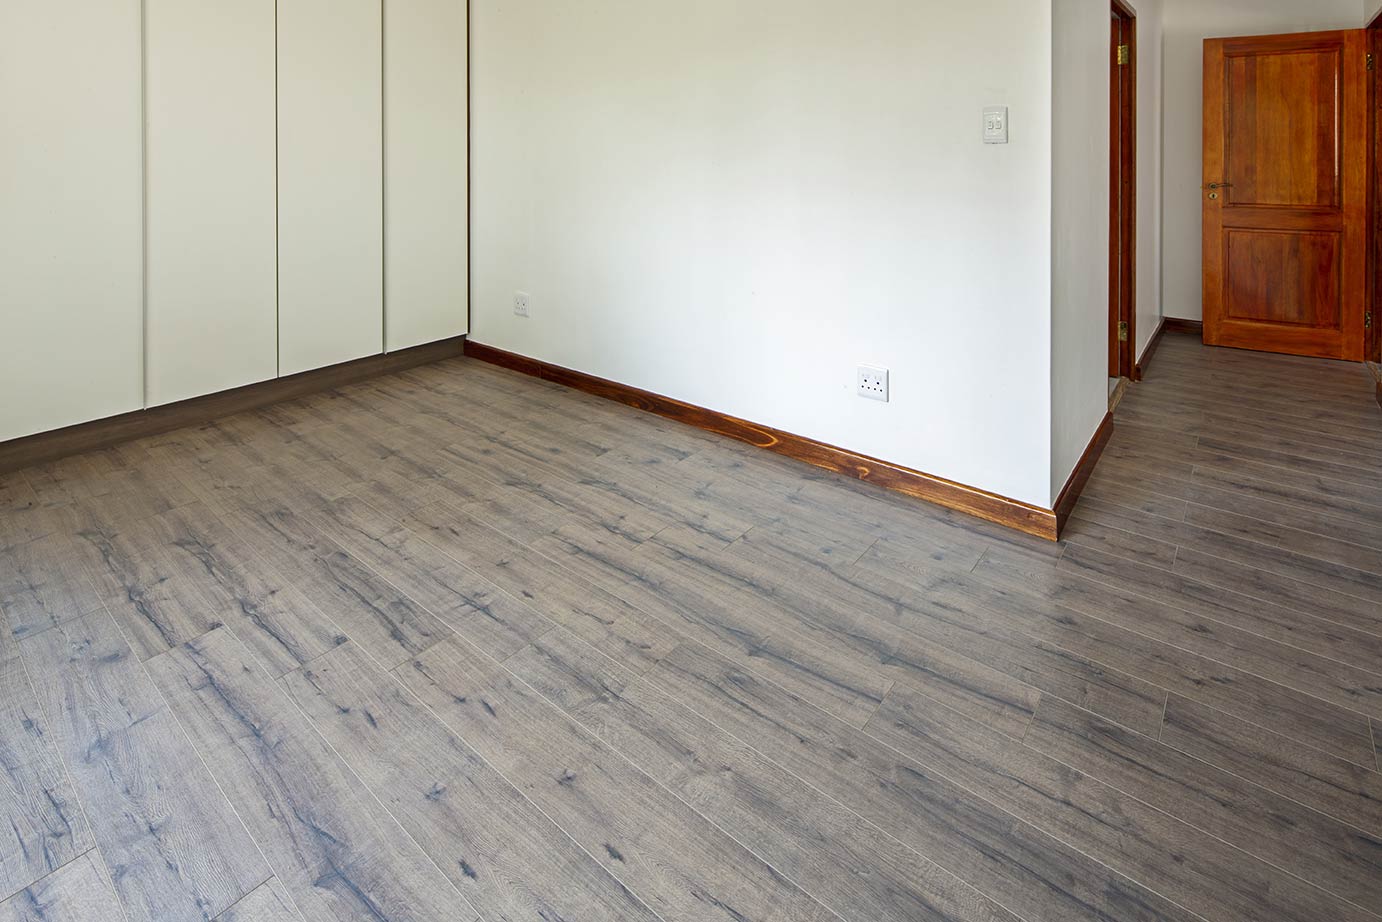 AGT selge laminate flooring in newly renovated home